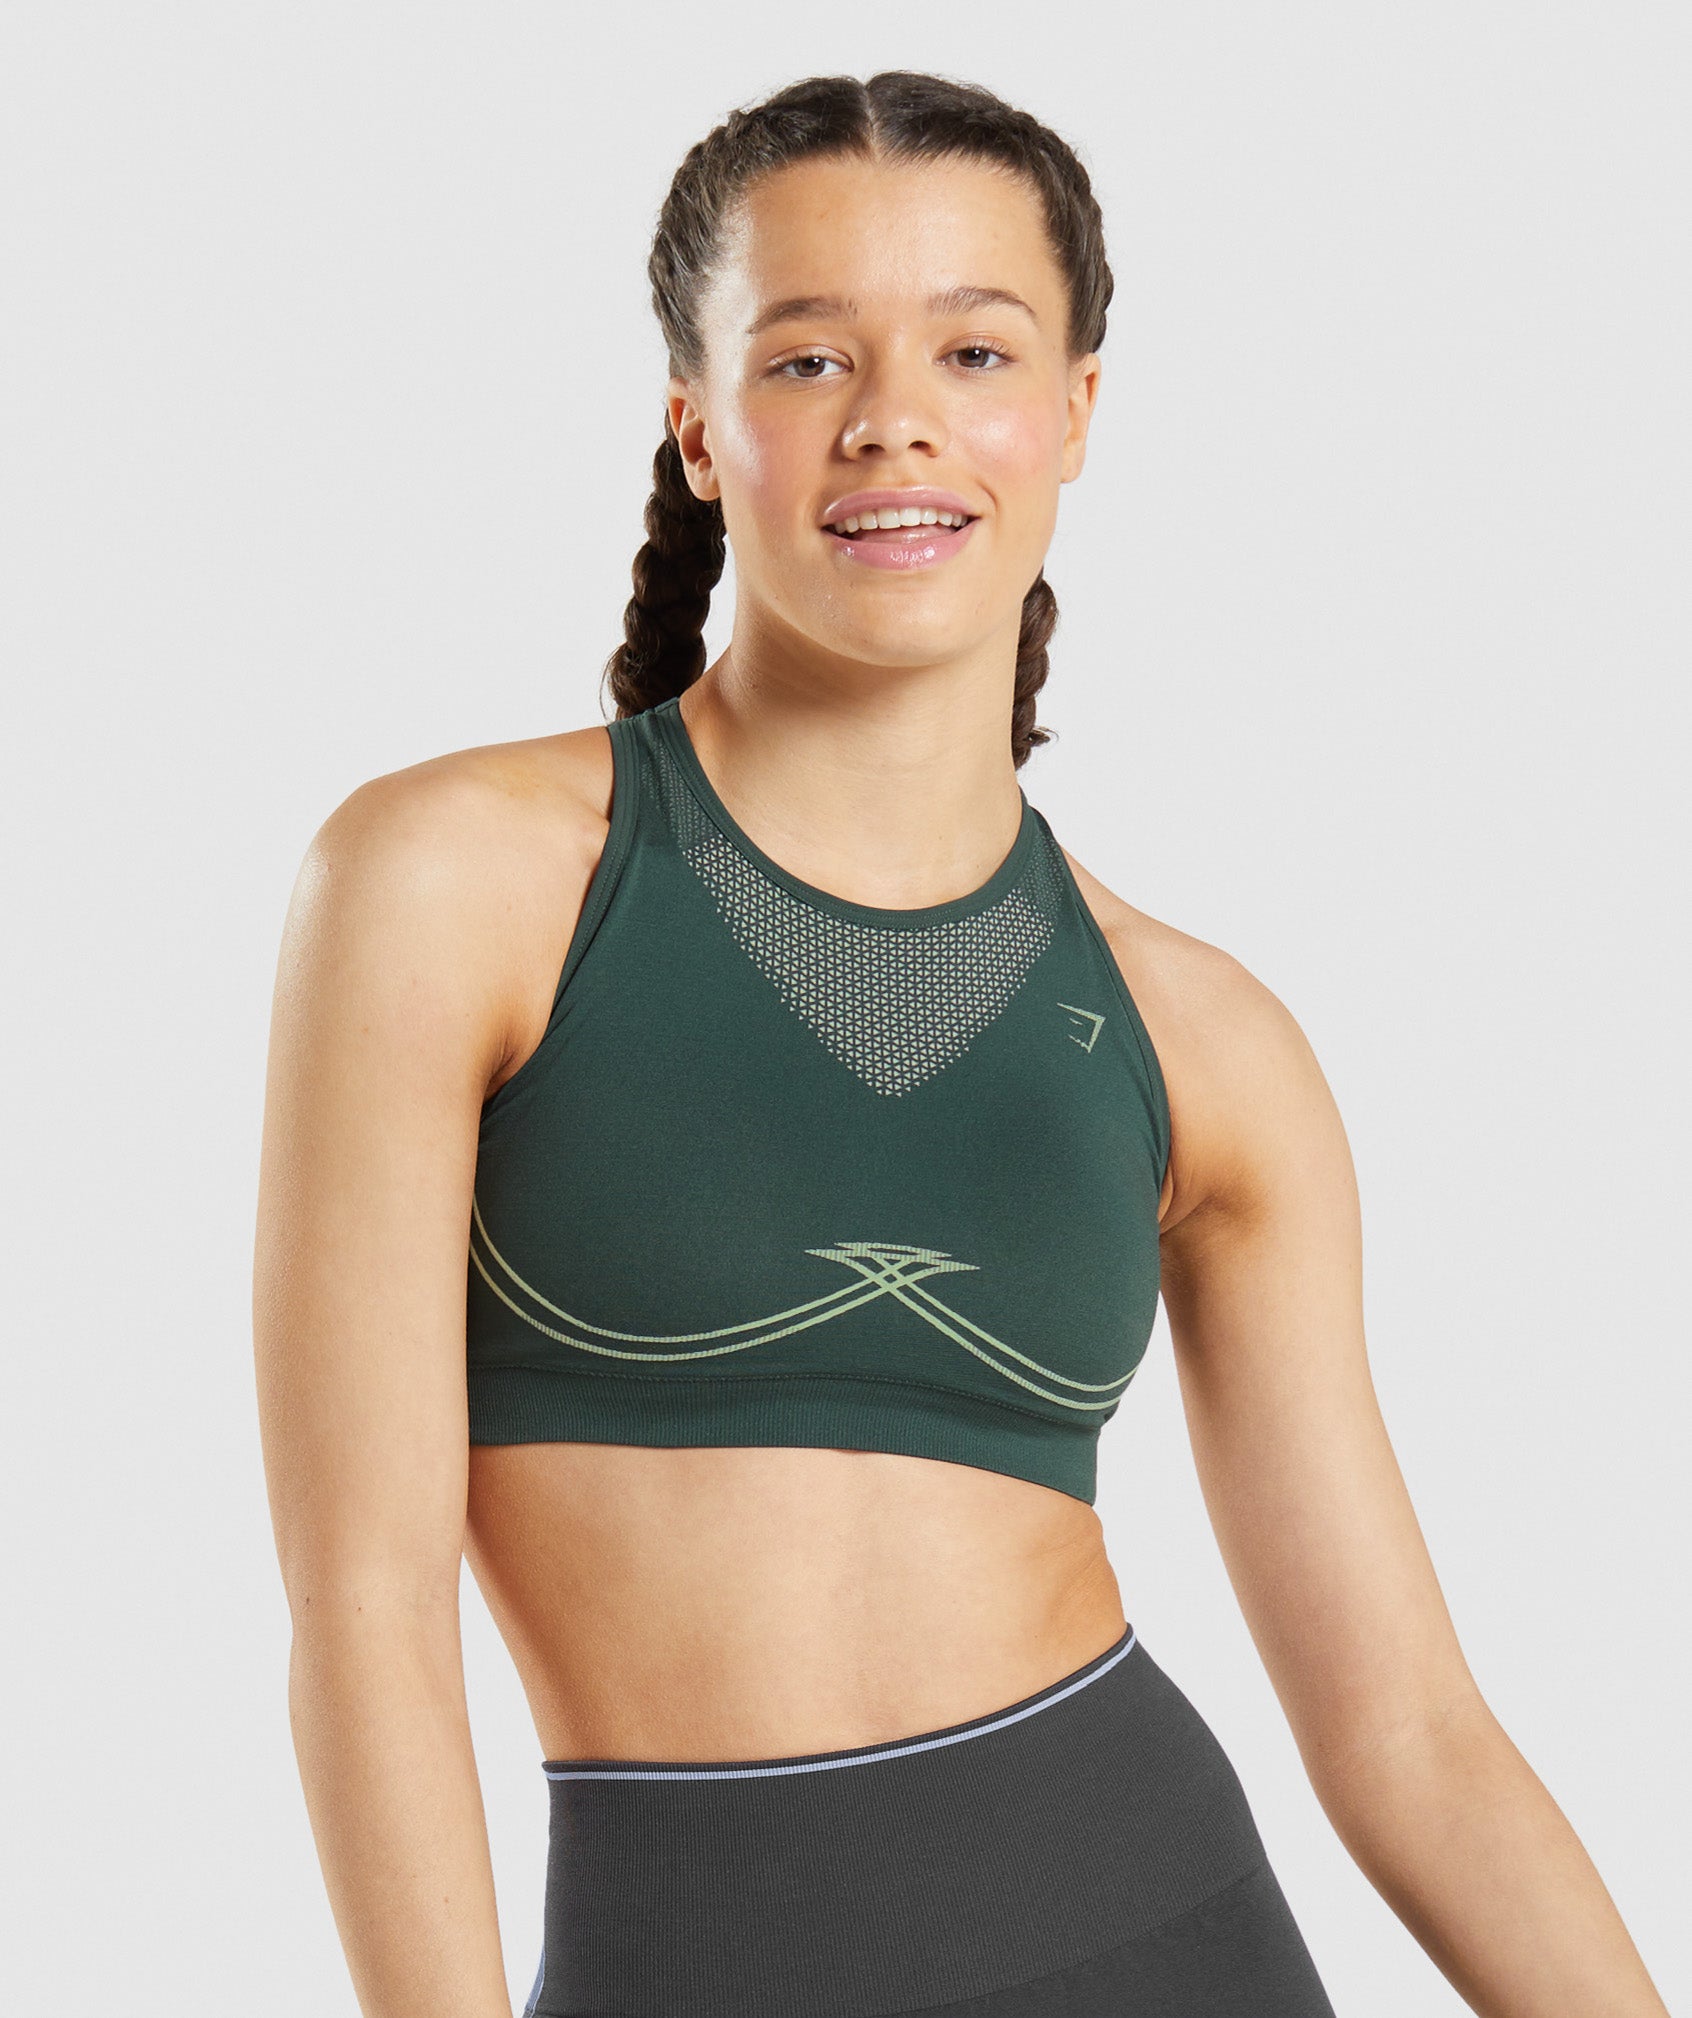 Gymshark Legacy Sports Bra Green Size XS - $40 New With Tags